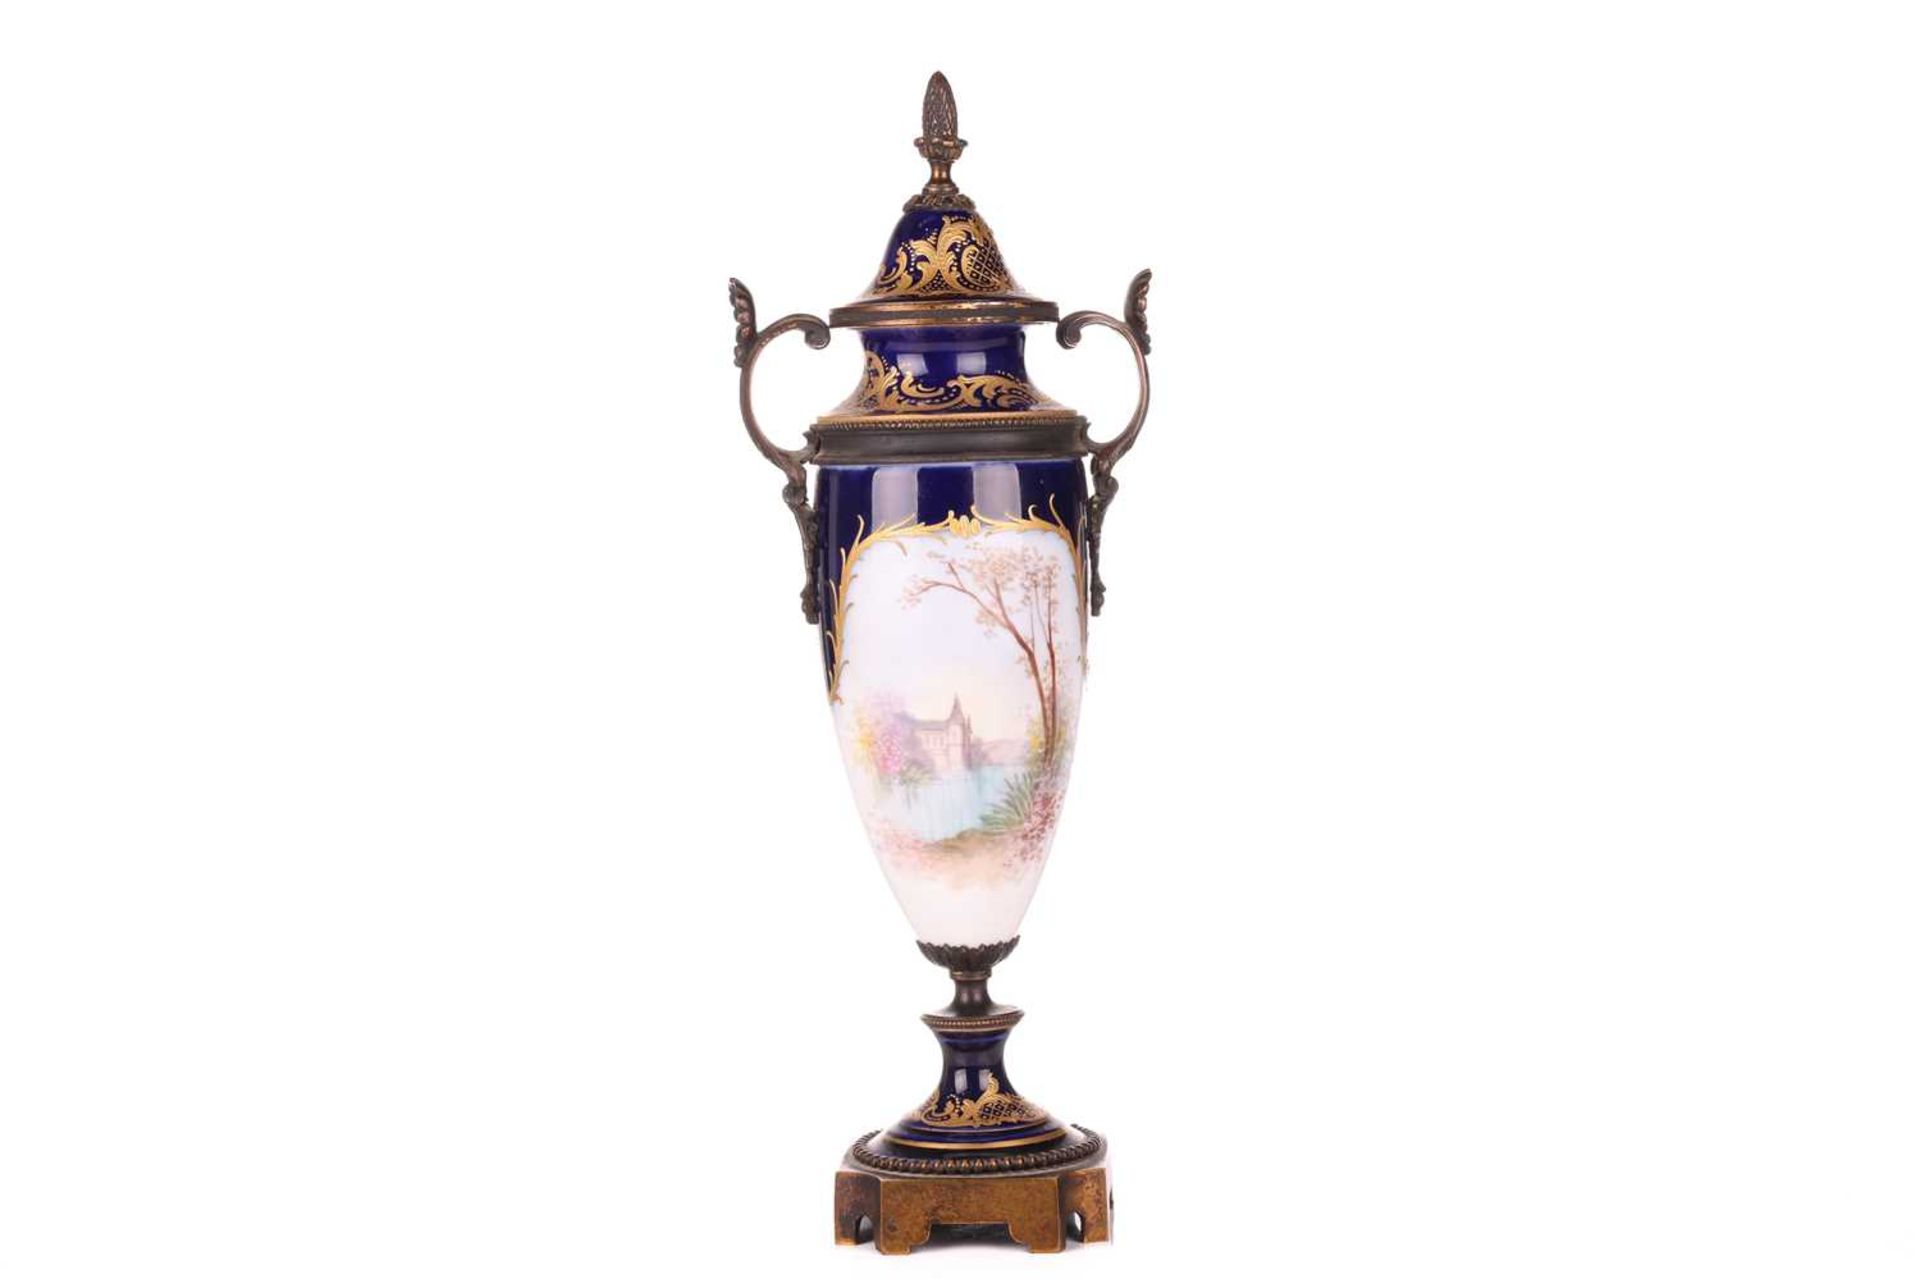 A 19th-century Sevres porcelain vase and cover, decorated with a courting couple, a chateau and lake - Image 6 of 6